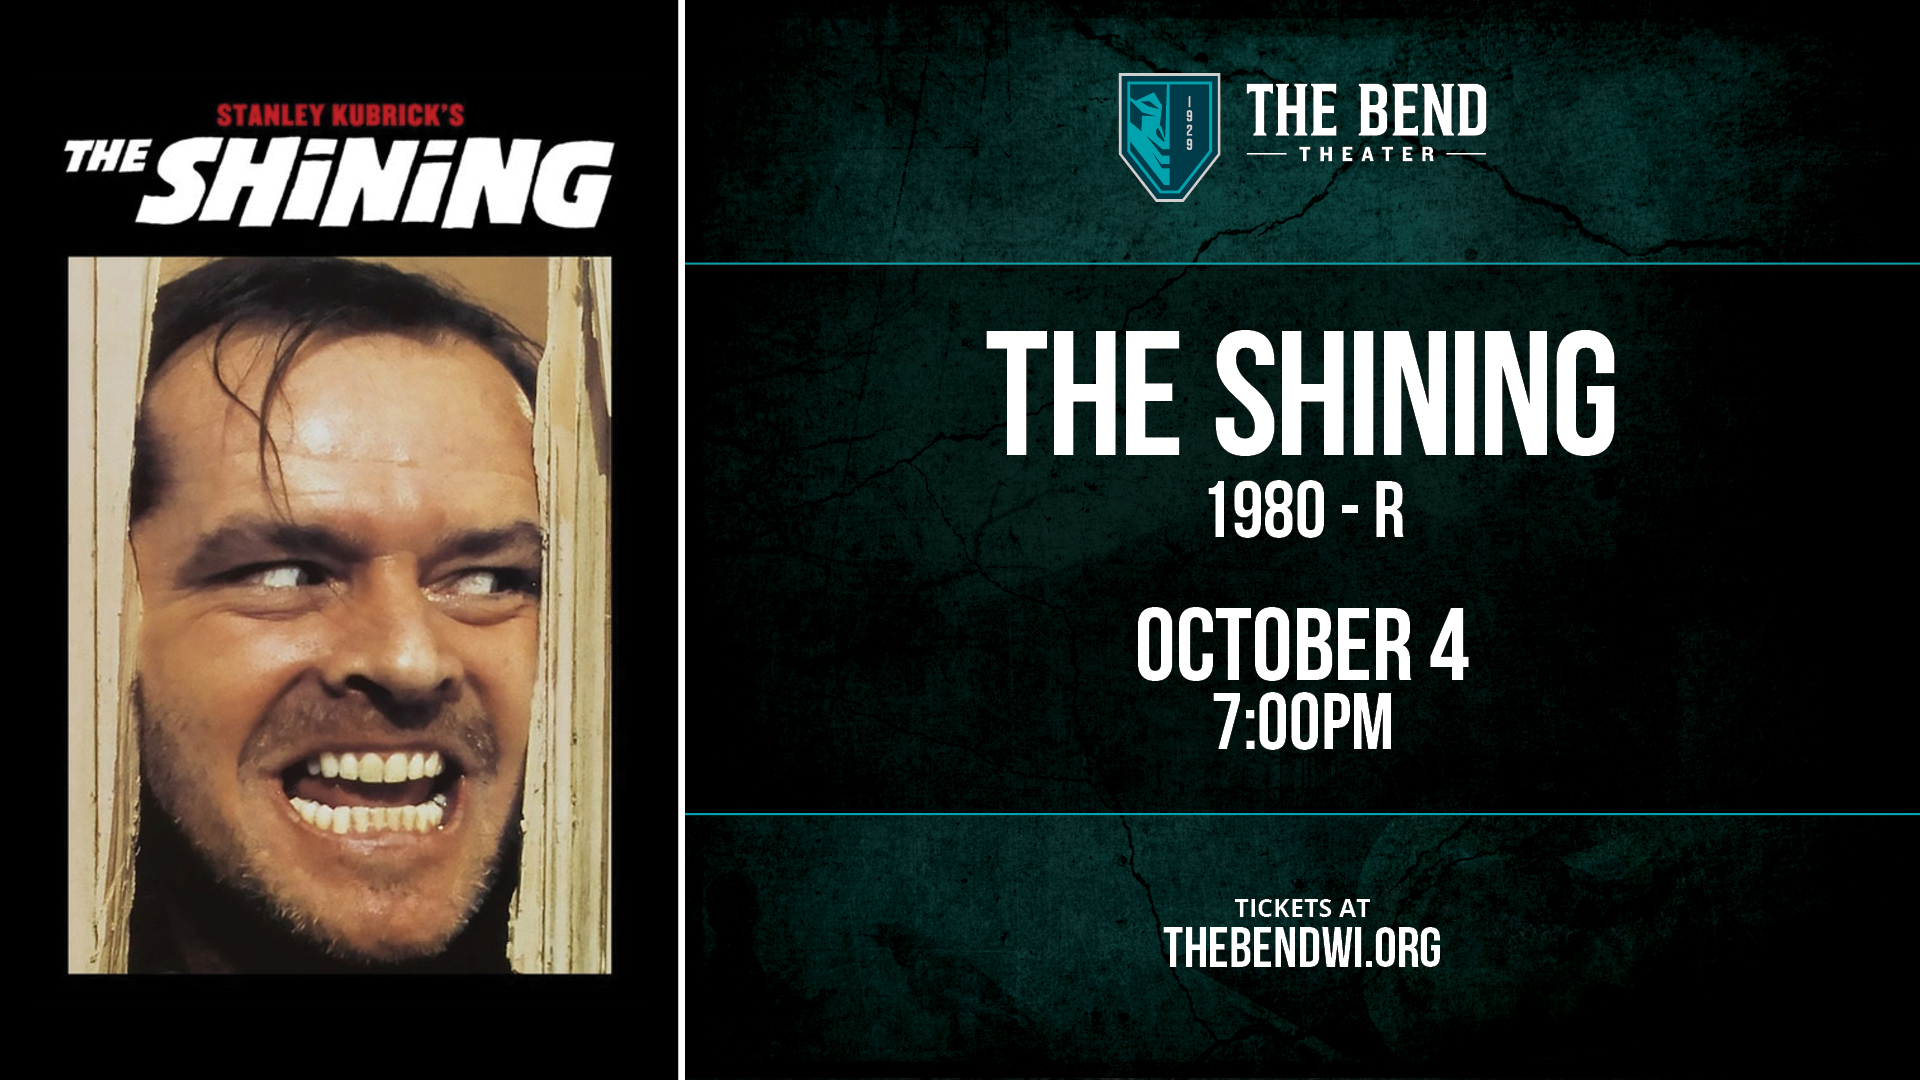 The Shining at The Bend Theater